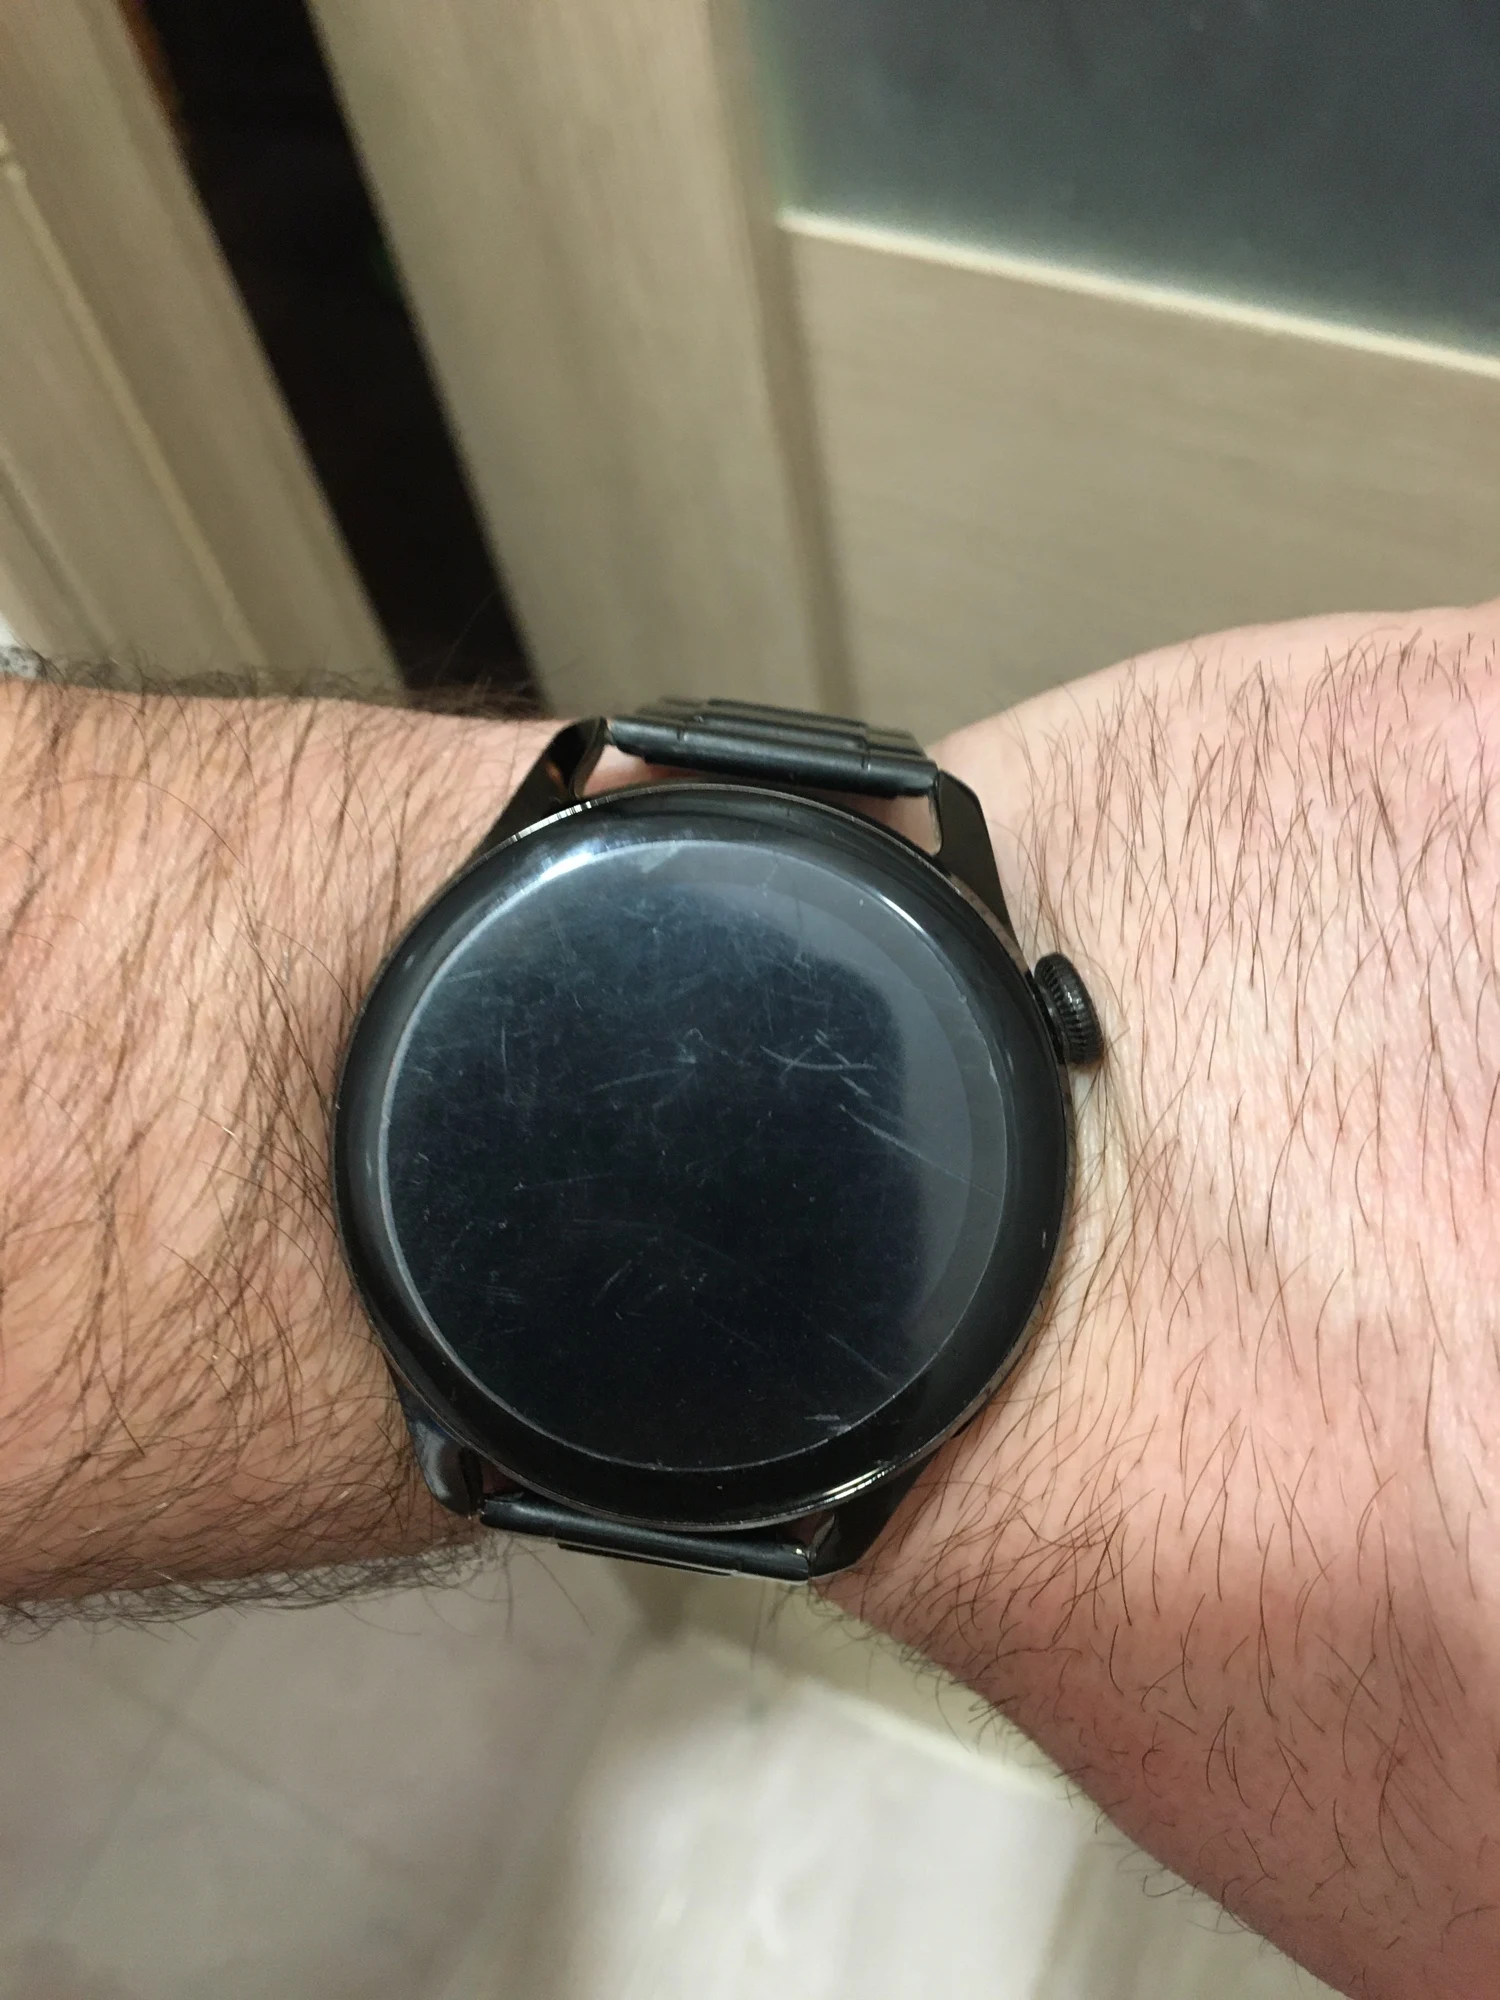 LIGE New Bluetooth Call Smart Watch photo review